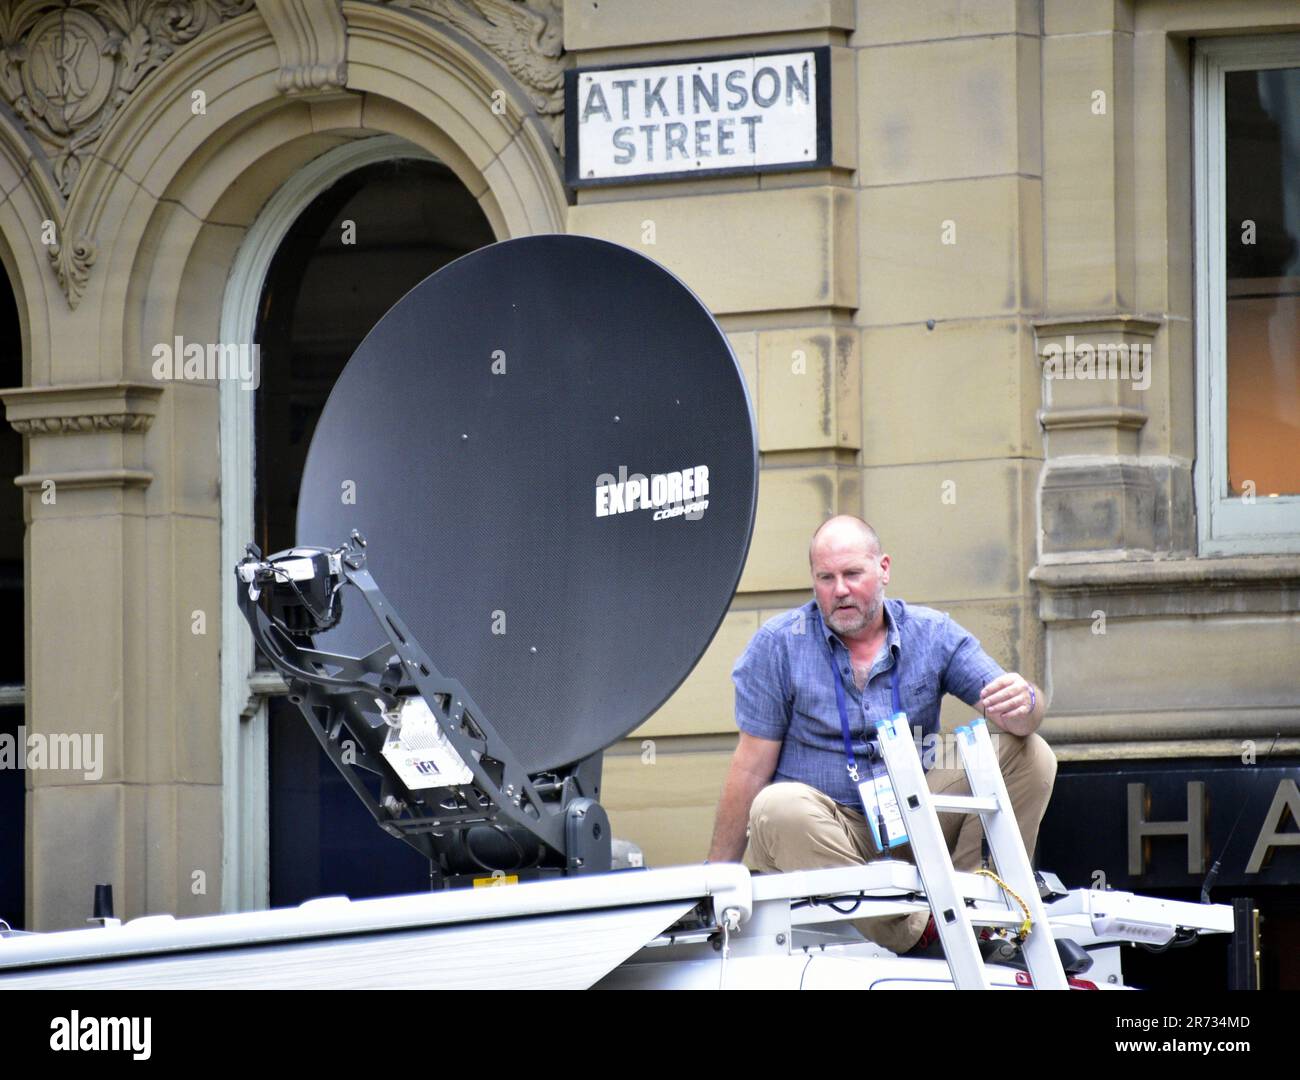 Manchester, UK. 12th June, 2023. A man sits on a satellite tv truck as fans wait as Manchester City Football Club gets ready to hold an open top bus victory parade in central Manchester, UK, to mark the achievement of winning the treble: the Premier League, the FA Cup, and the Champions League. On Saturday Man City beat Inter Milan in Istanbul to secure the Champions League win. The parade of open top buses went through Manchester city centre watched by large, enthusiastic crowds, despite a thunderstorm and heavy rain. Credit: Terry Waller/Alamy Live News Stock Photo